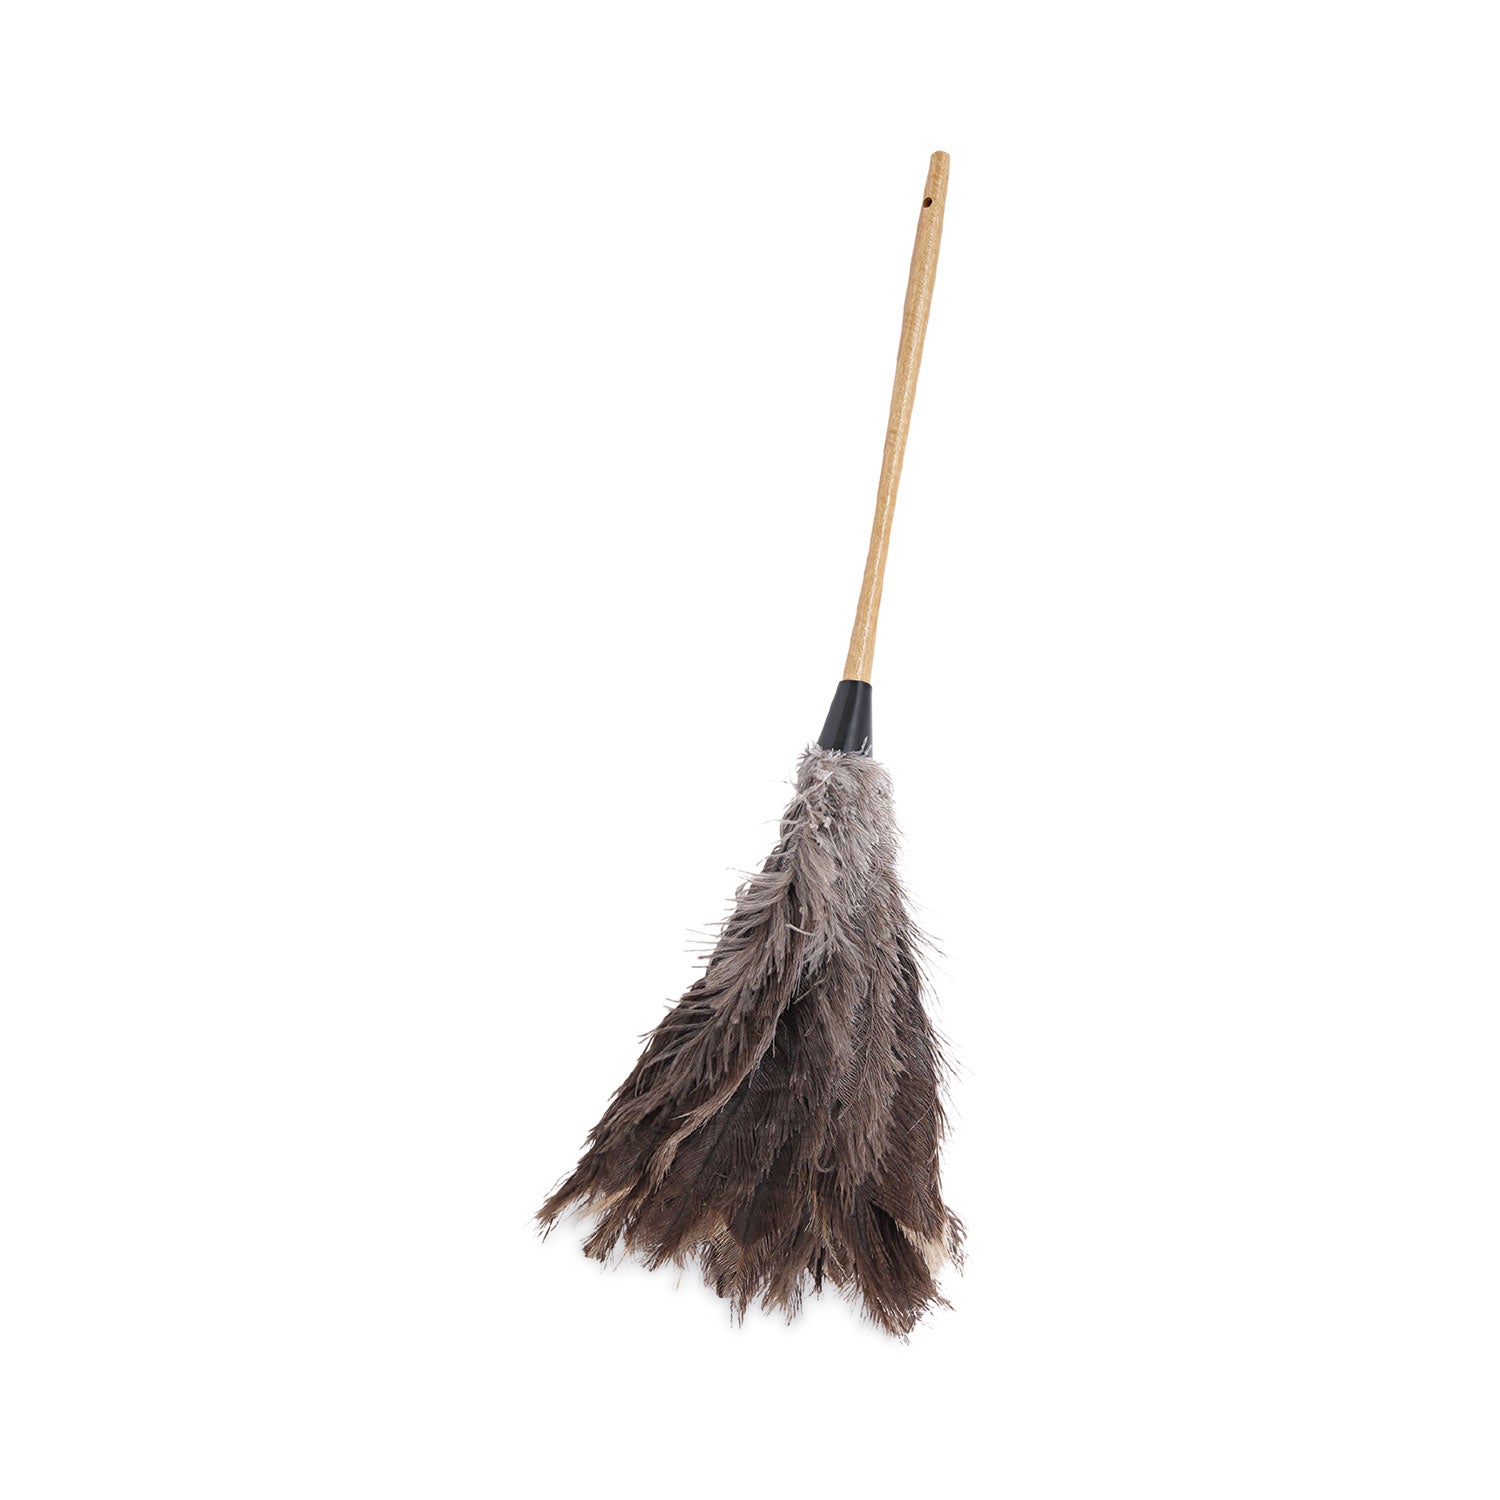 professional-ostrich-feather-duster-16-handle_bwk31fd - 1